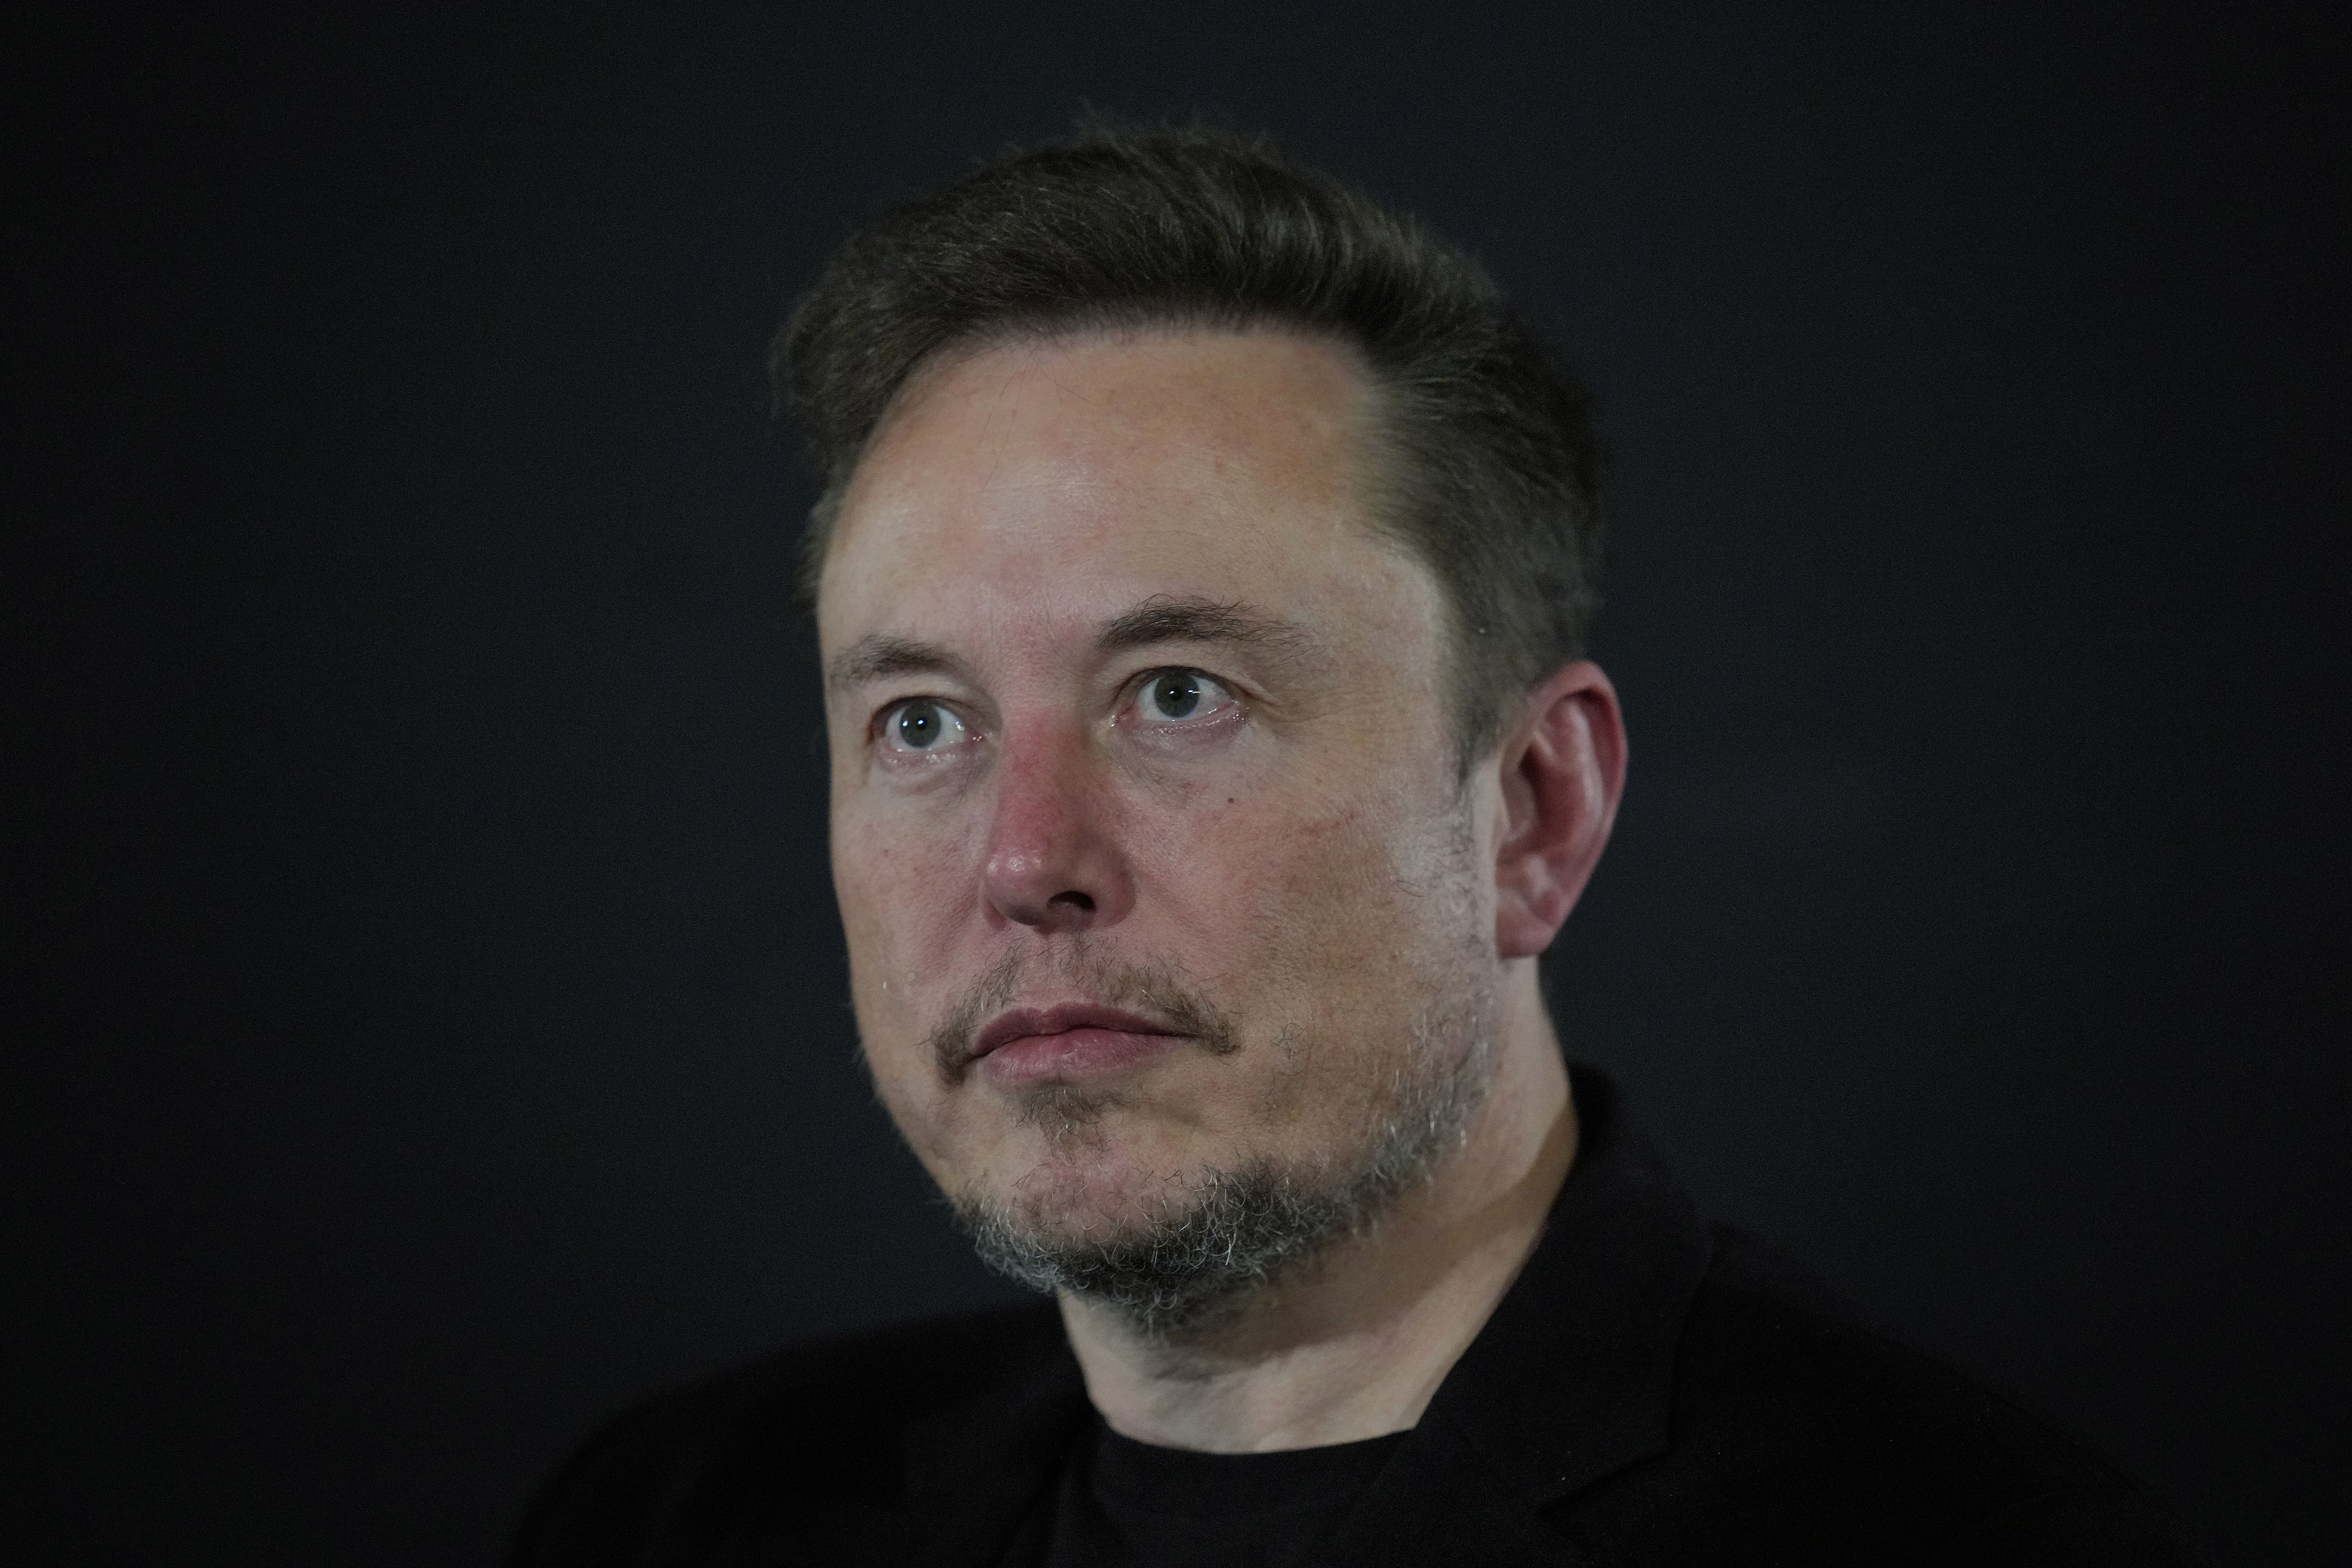 Elon Musk, chief executive of Tesla and SpaceX has raised concerns about AI and job prospects (Kirsty Wigglesworth/PA)